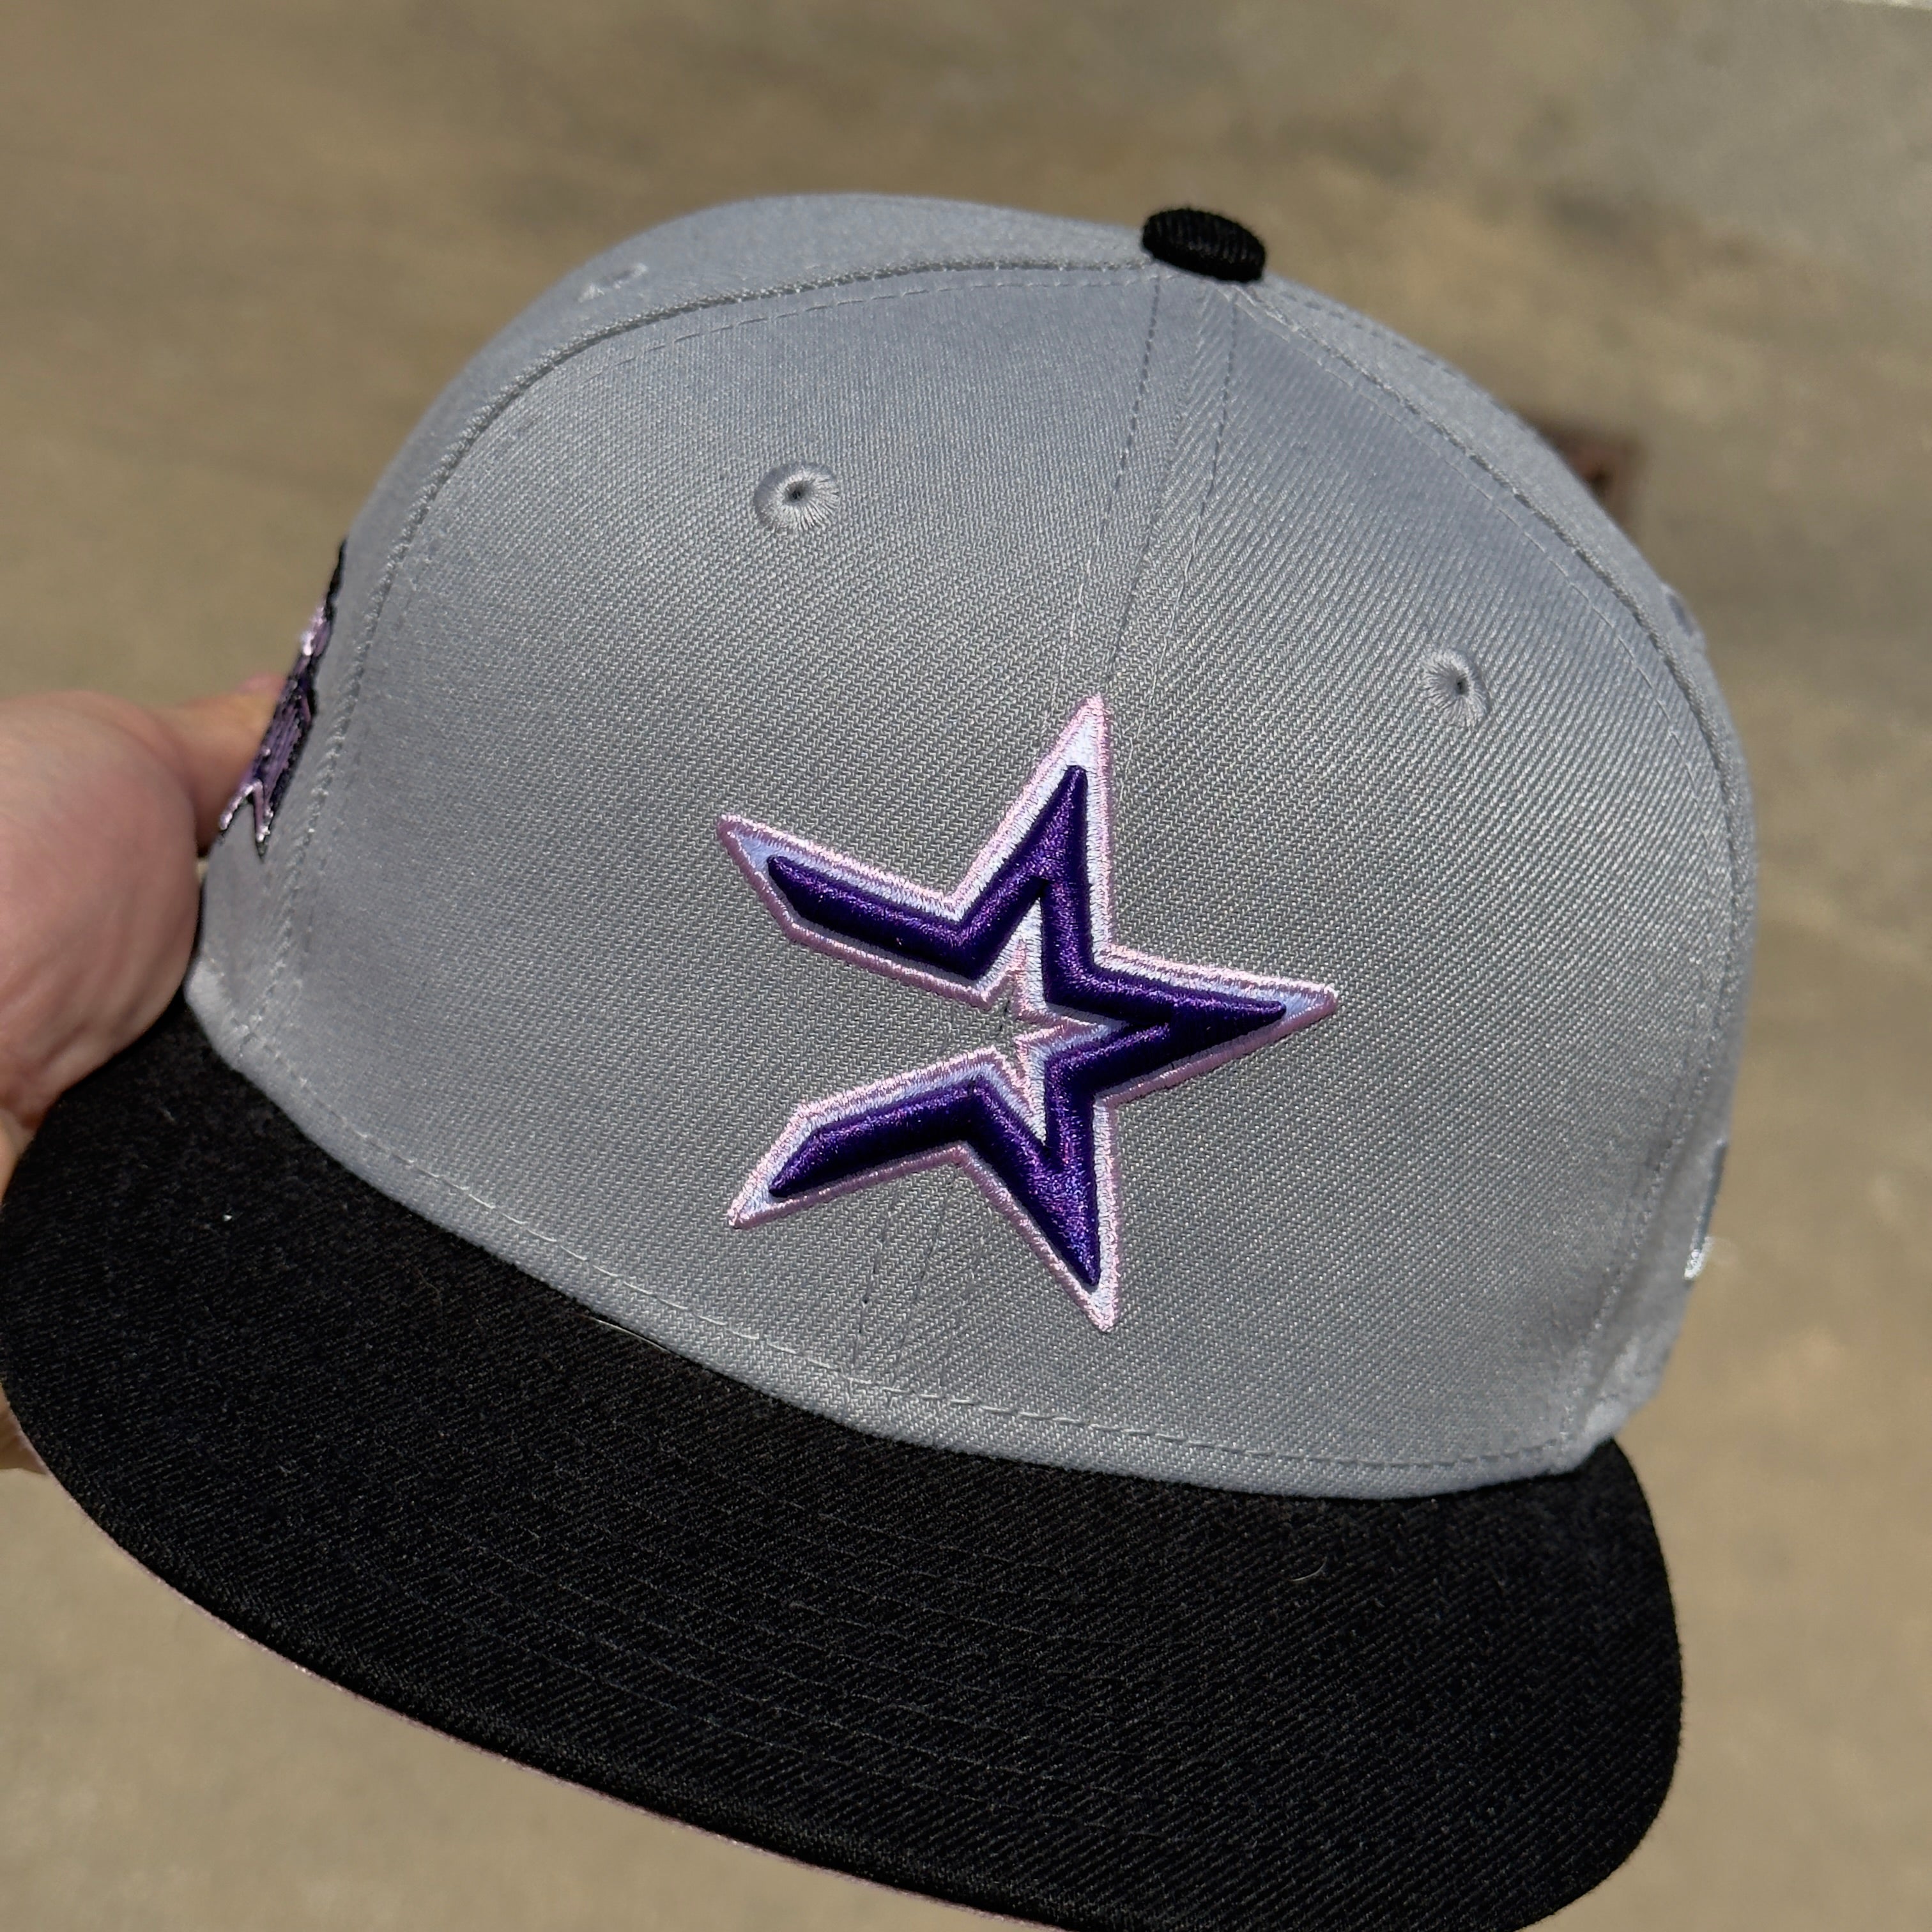 3/8 NEW Gray Houston Astros All Star Game Fuji 59fifty New Era Fitted Hat Cap